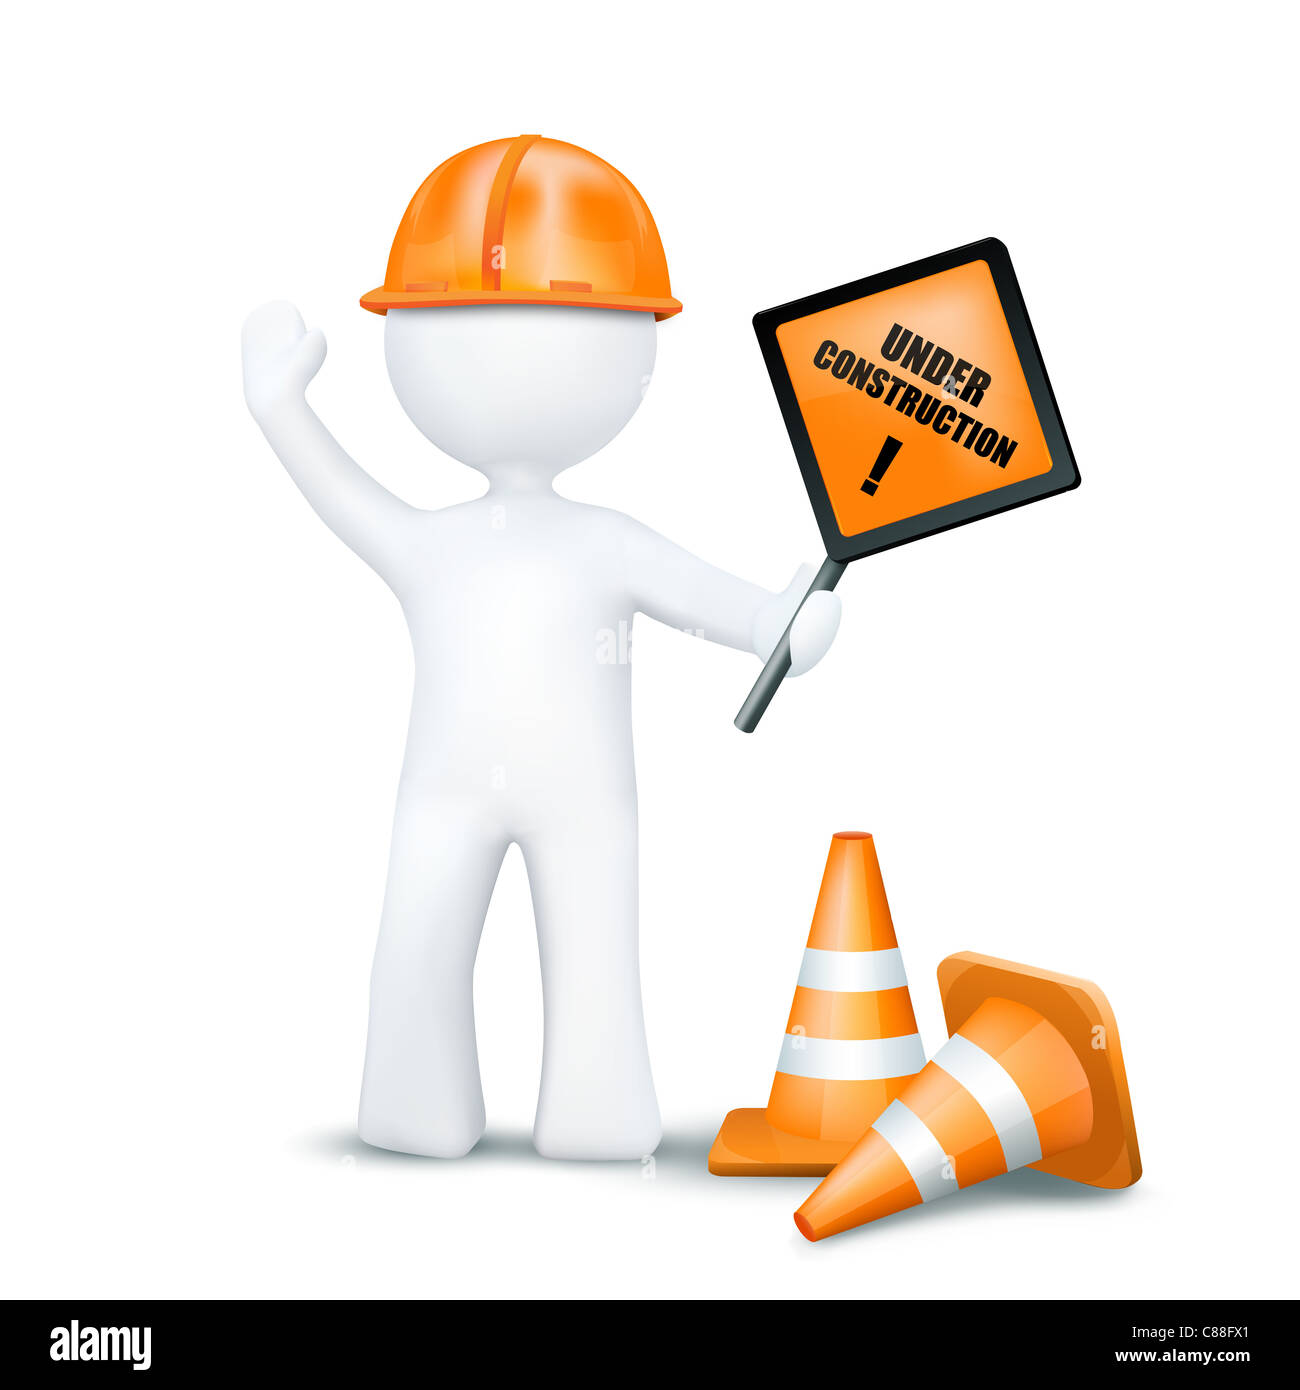 illustration of 3d character with under construction elements on an isolated white background Stock Photo